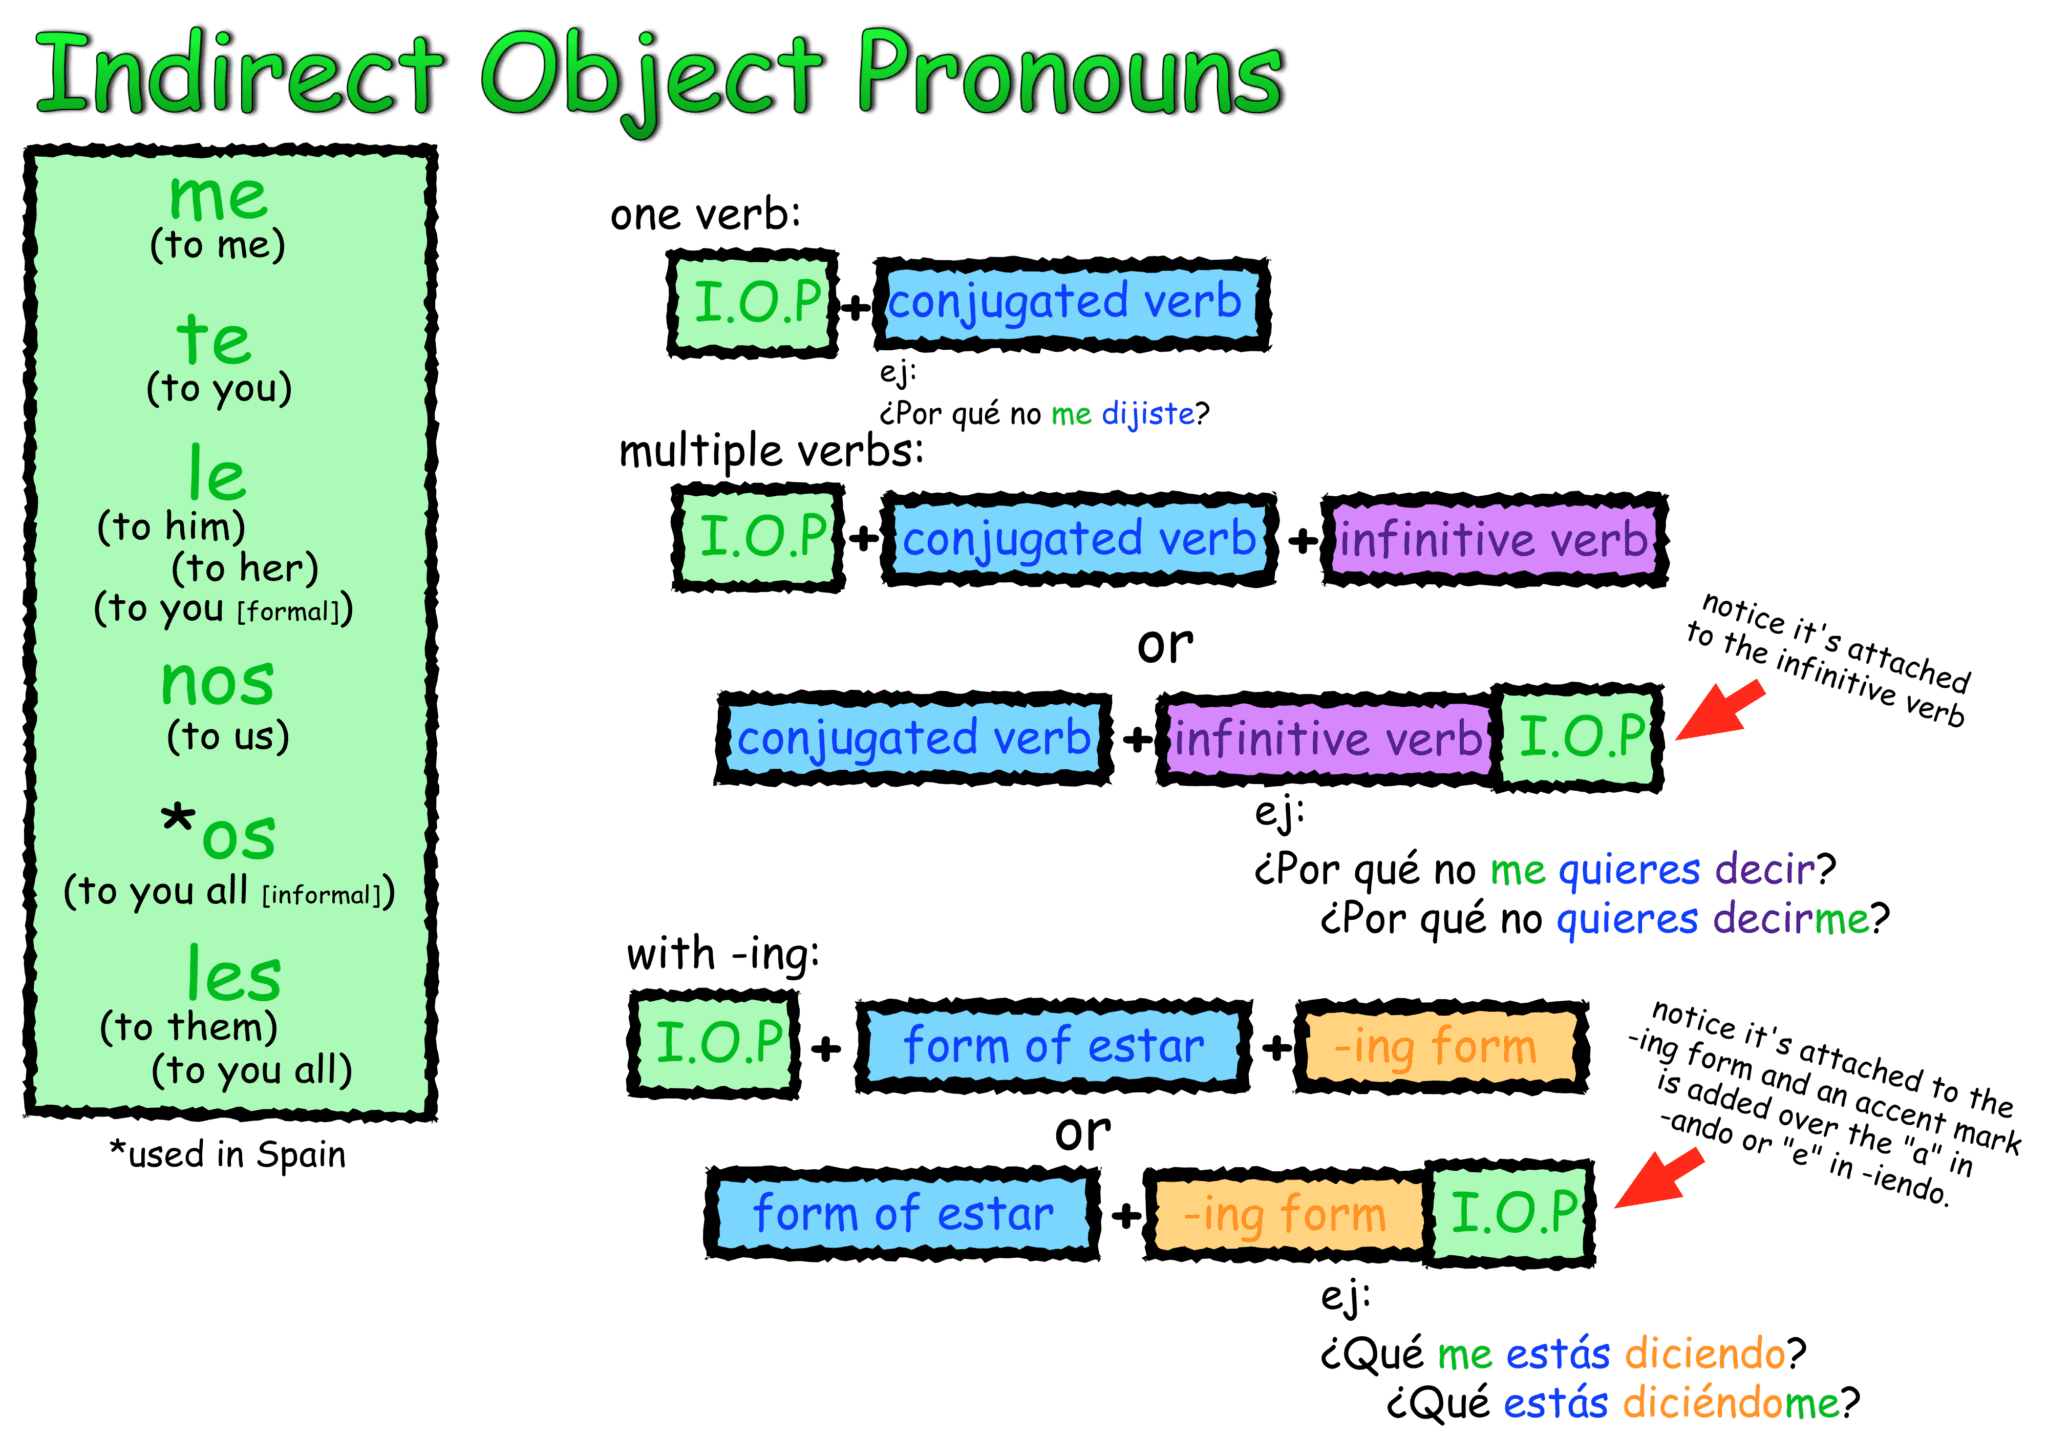 How To Use Indirect Object Pronouns